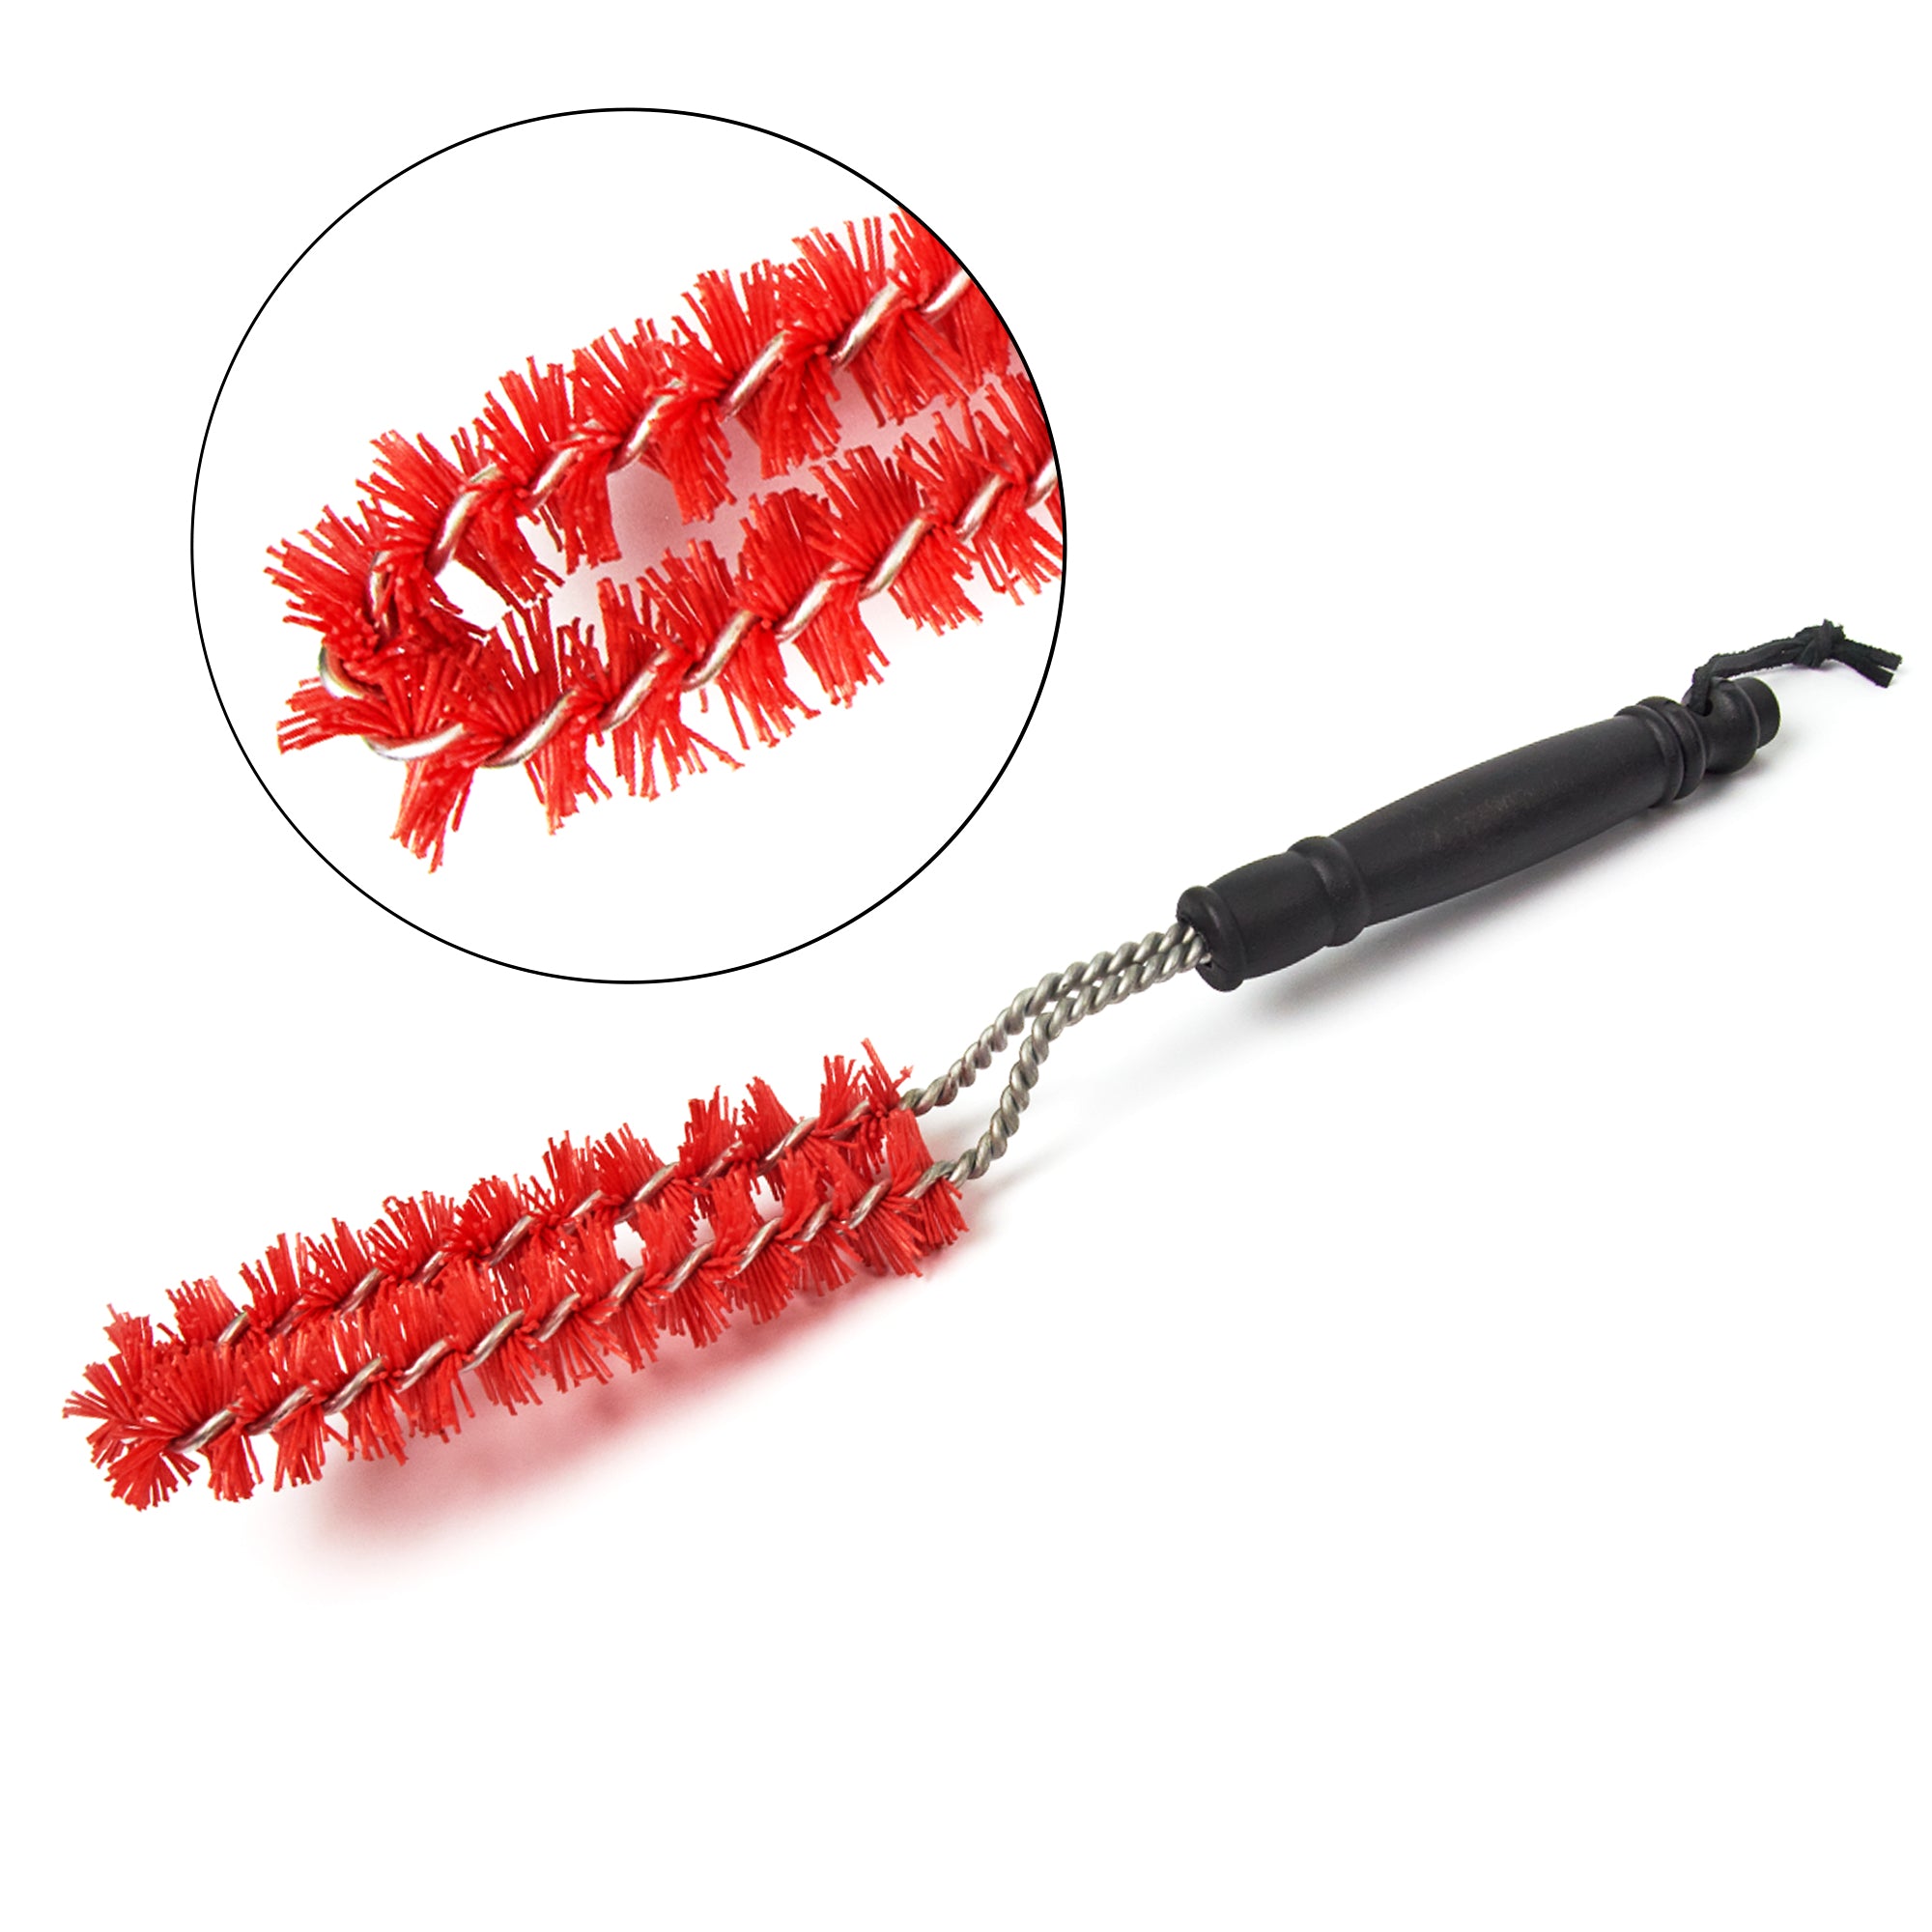 Grill grate cleaning brush